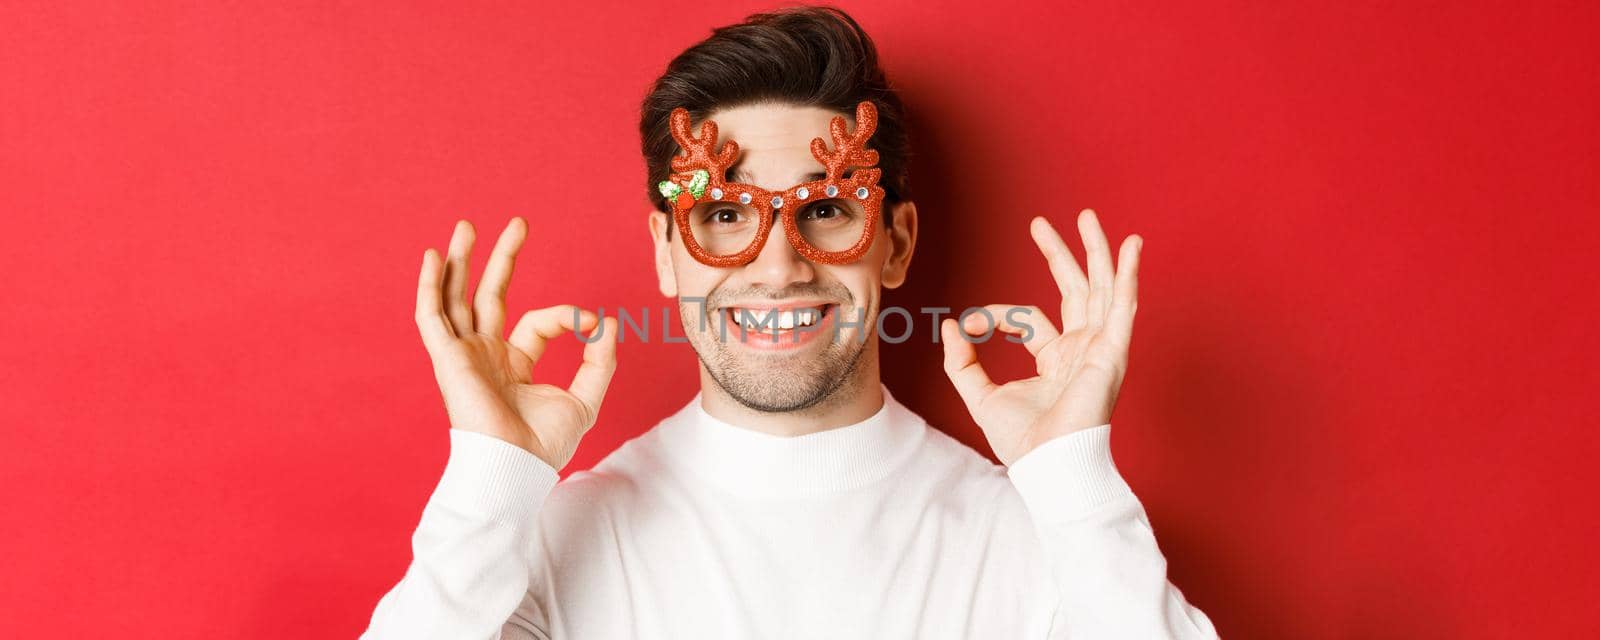 Concept of winter holidays, christmas and celebration. Close-up of attractive man in party glasses, showing okay signs and smiling, praise something good, red background.